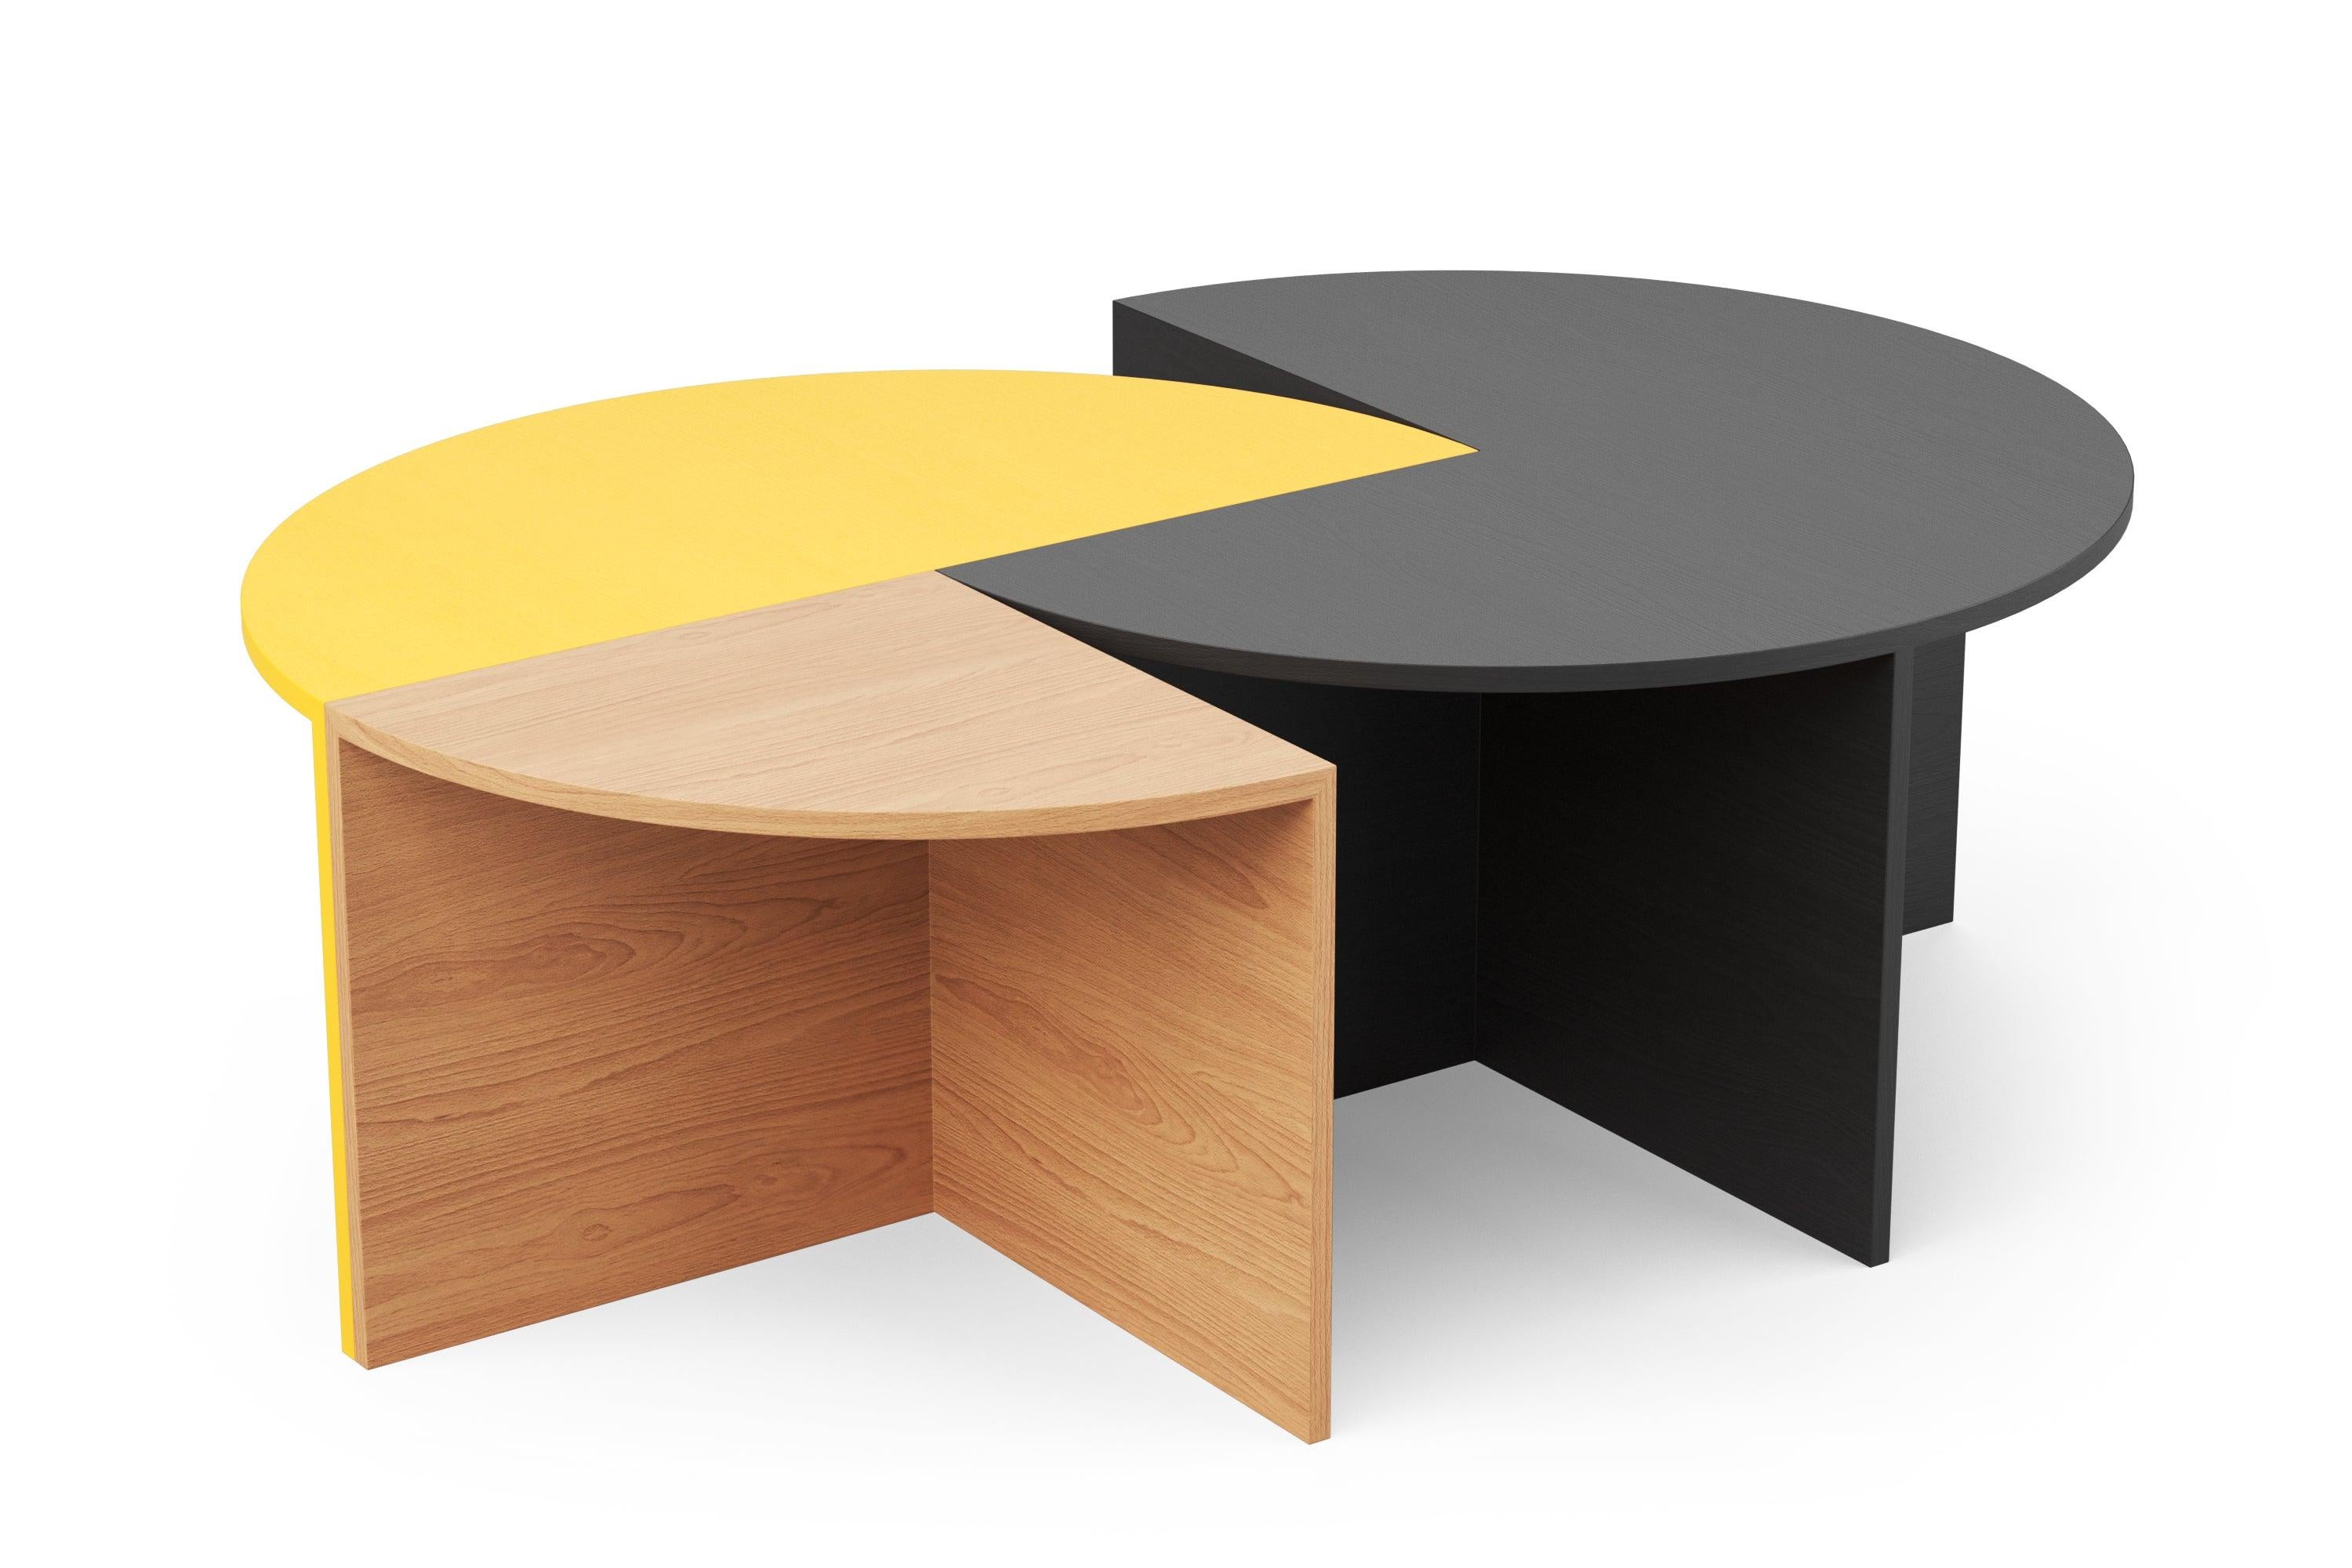 Mexican Hayche Pie Chart System 1/2 Table, Black, Solid Wood, UK, Made To Order For Sale